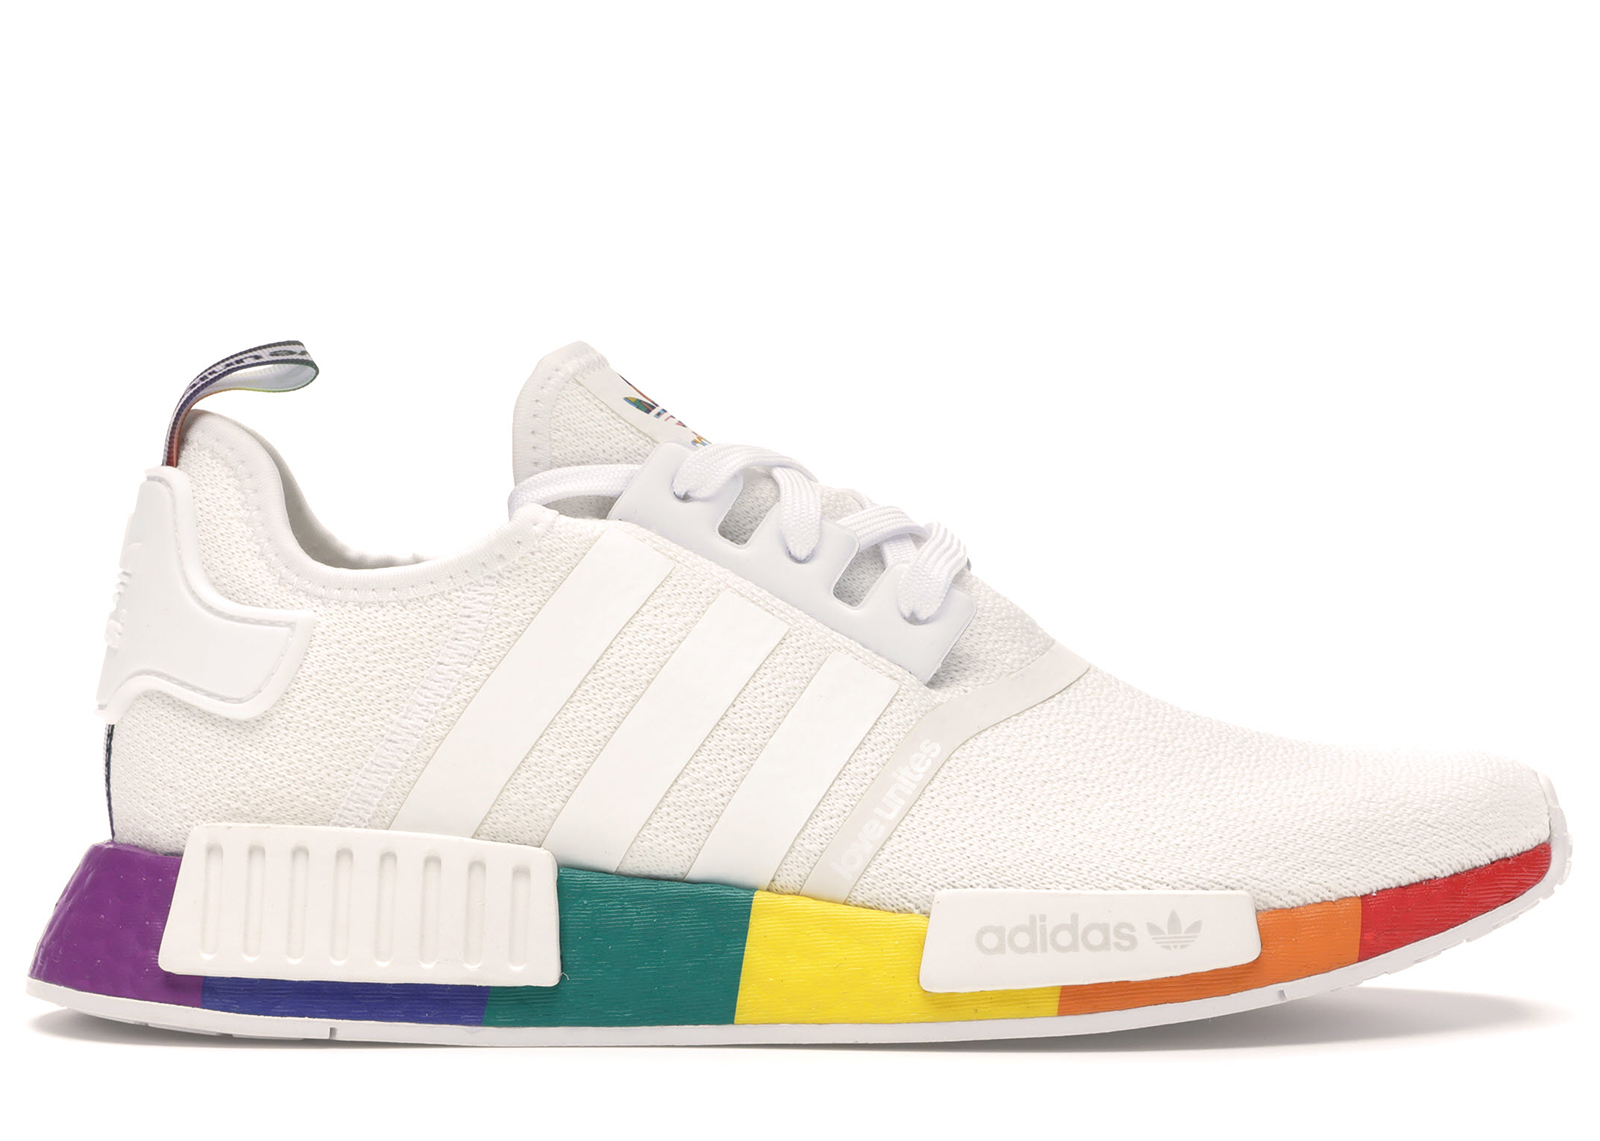 adidas NMD - All Sizes & Colorways at StockX مانيكان مجوهرات